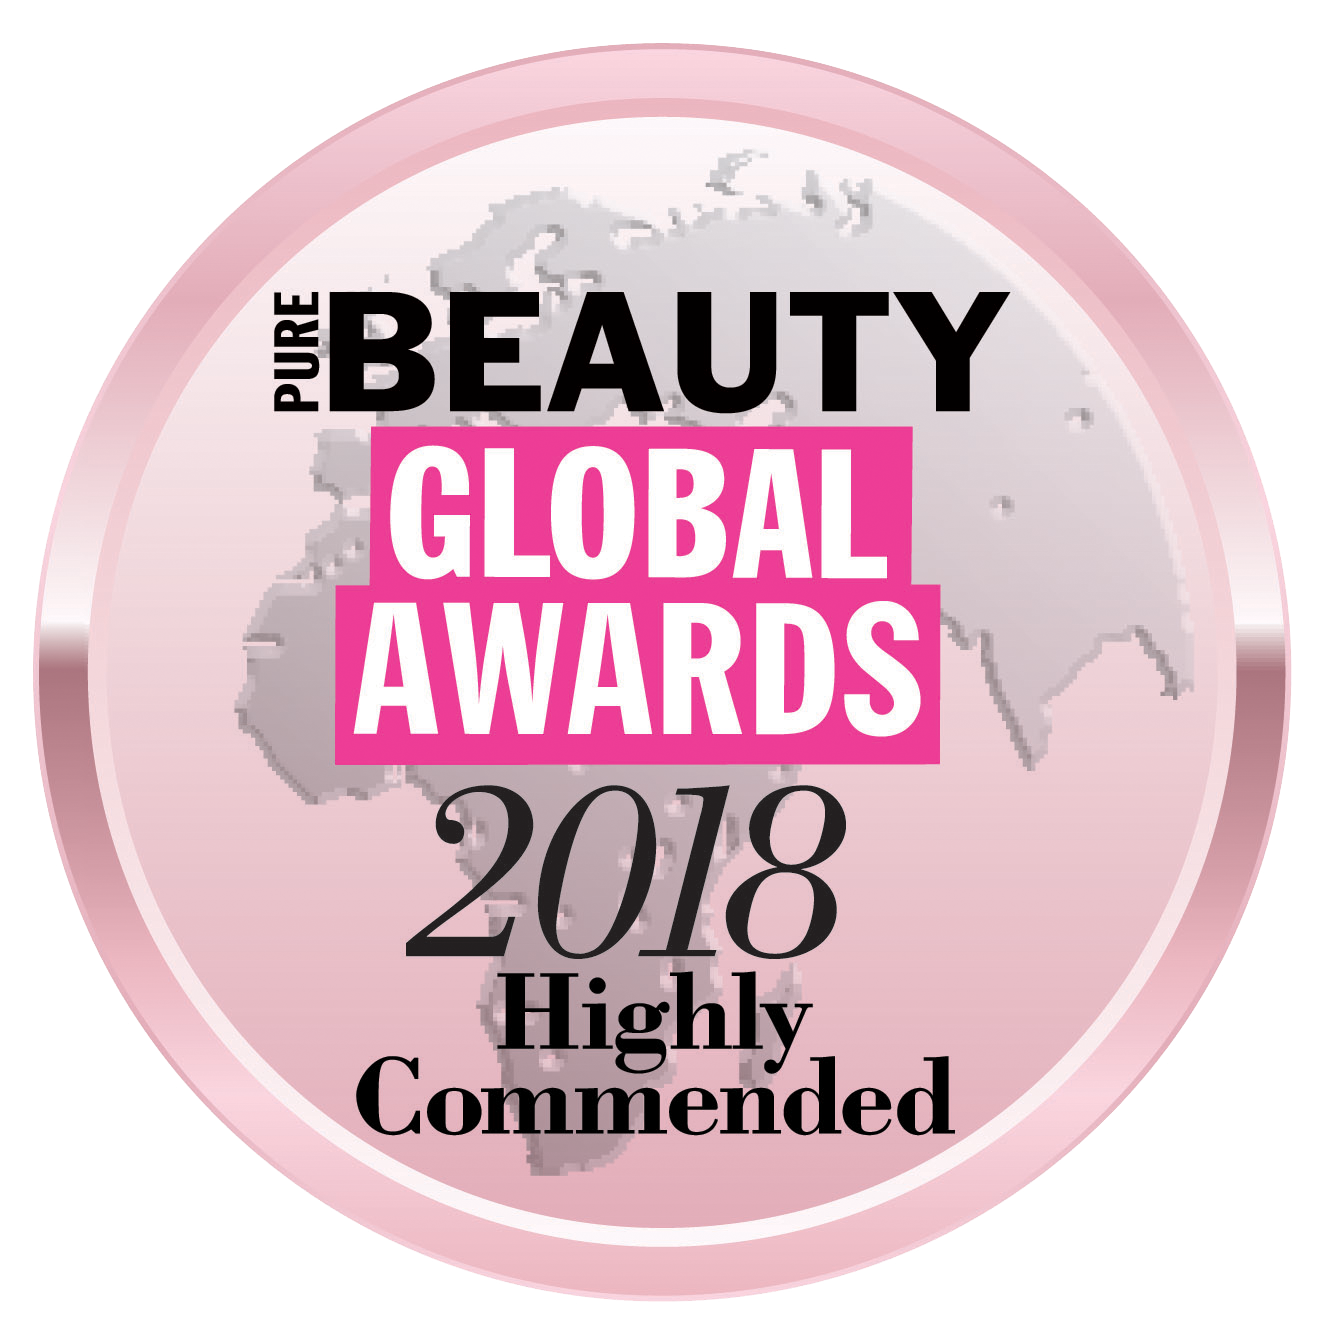 The Pure Beauty Global Awards 2018 highly commended Alteya's exceptional Bulgarian rose fields.